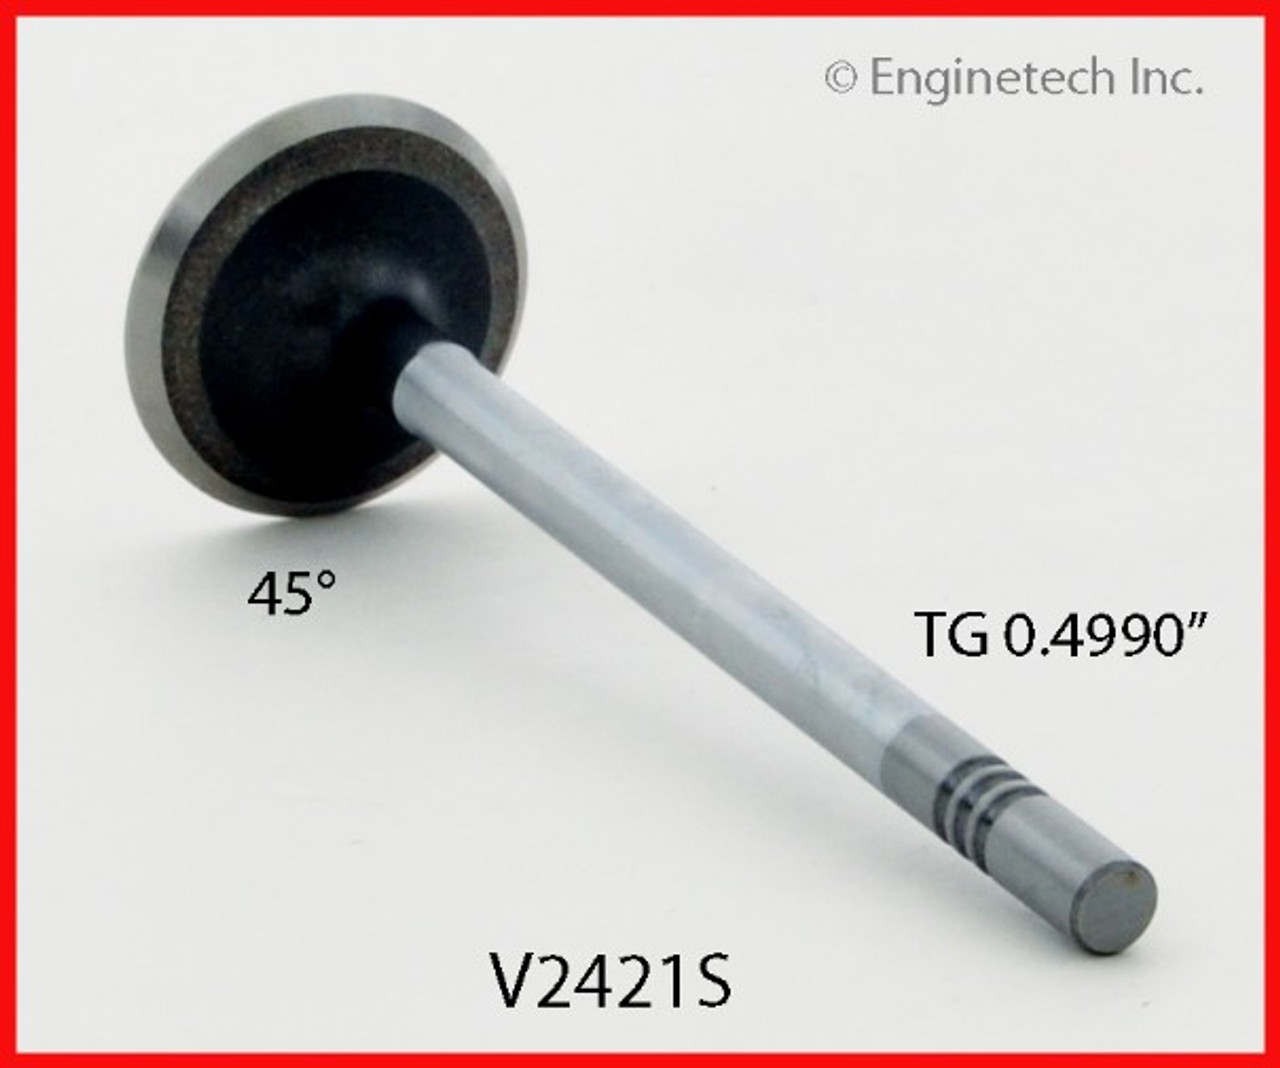 Exhaust Valve - 1997 Ford F-250 5.4L (V2421S.C29)